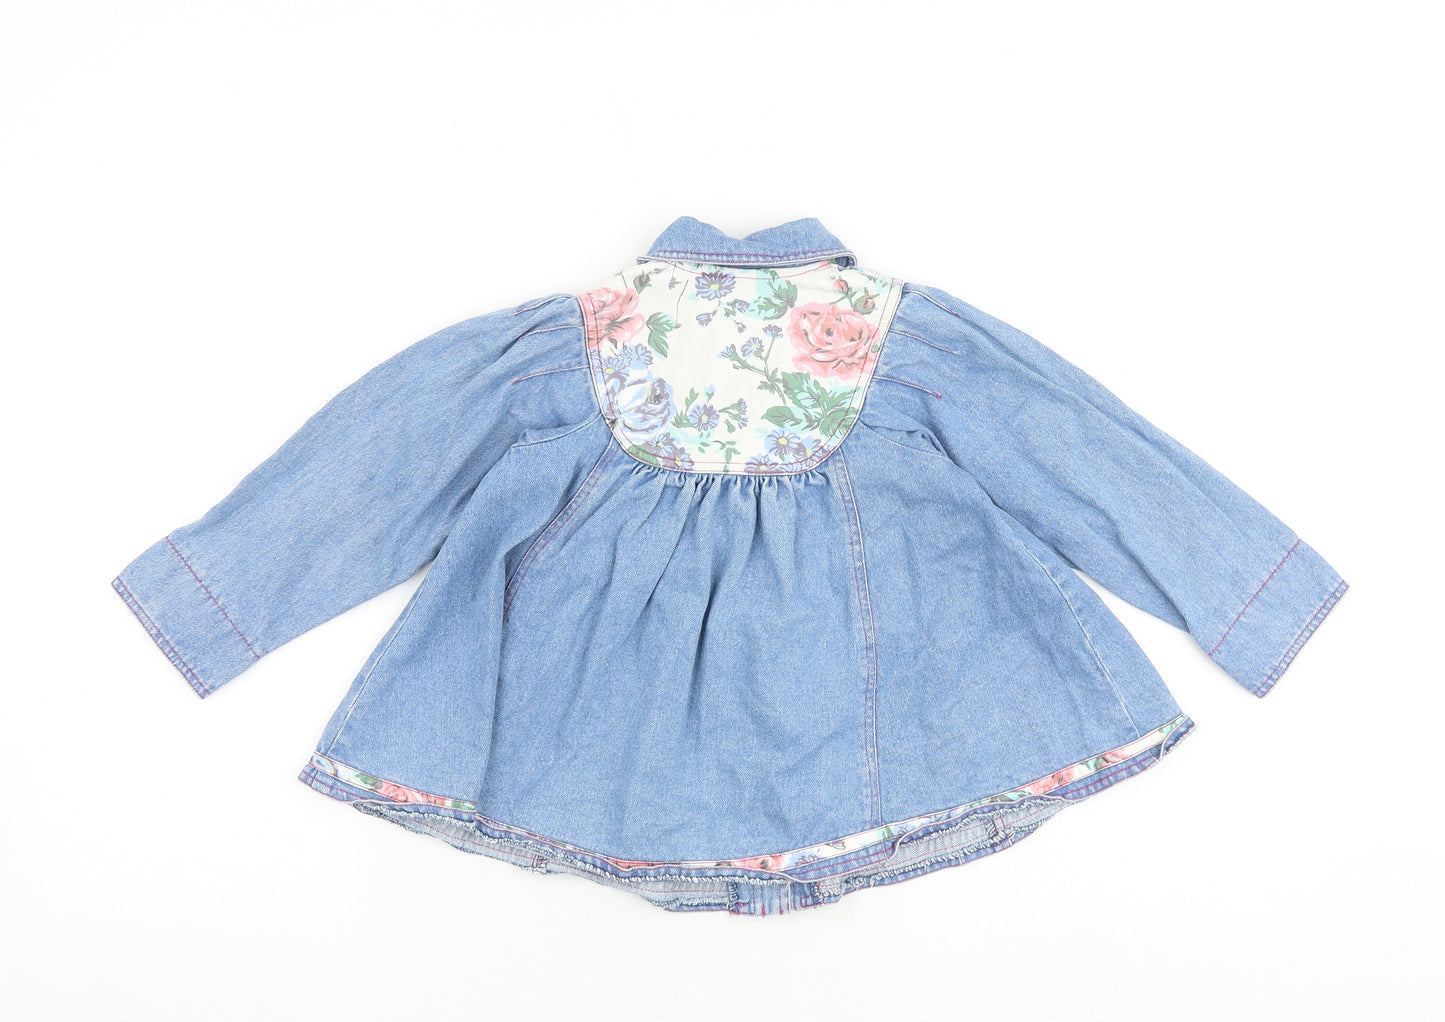 Linus&Lotta Girls Blue Floral Jacket Size 2-3 Years Button